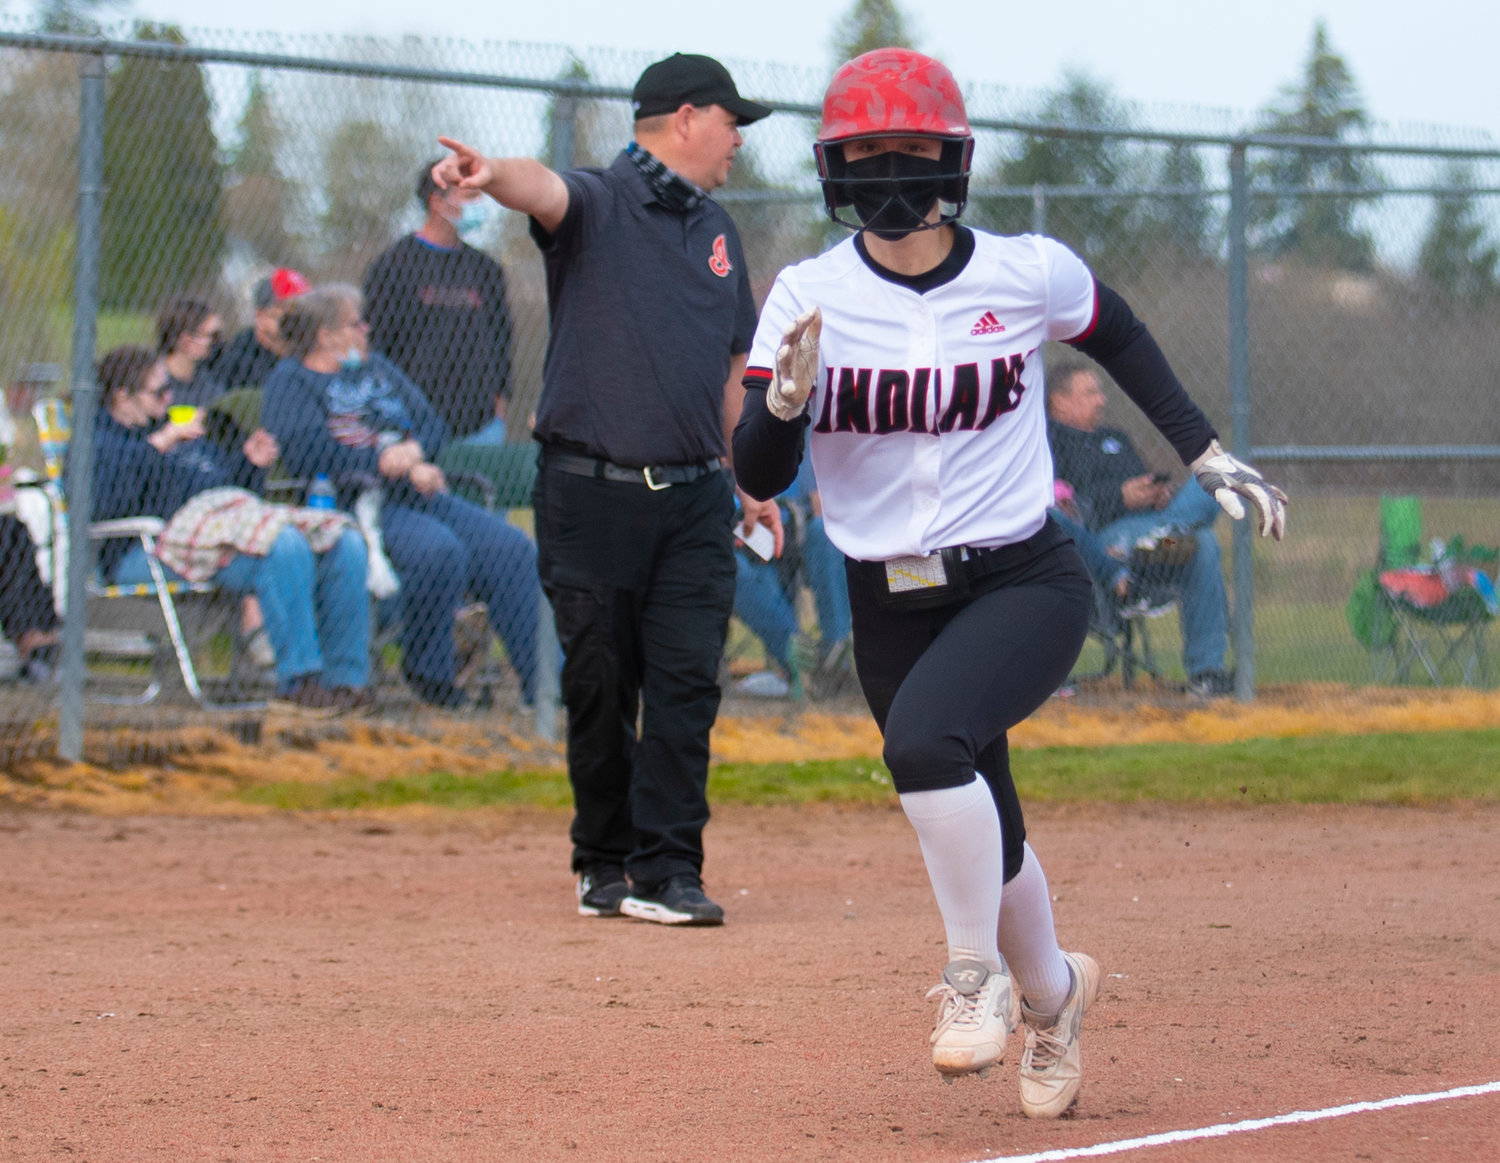 Toledo's Brynn Williams sprints home to score a run for the Indians in the first inning against Wahkiakum on Thursday.